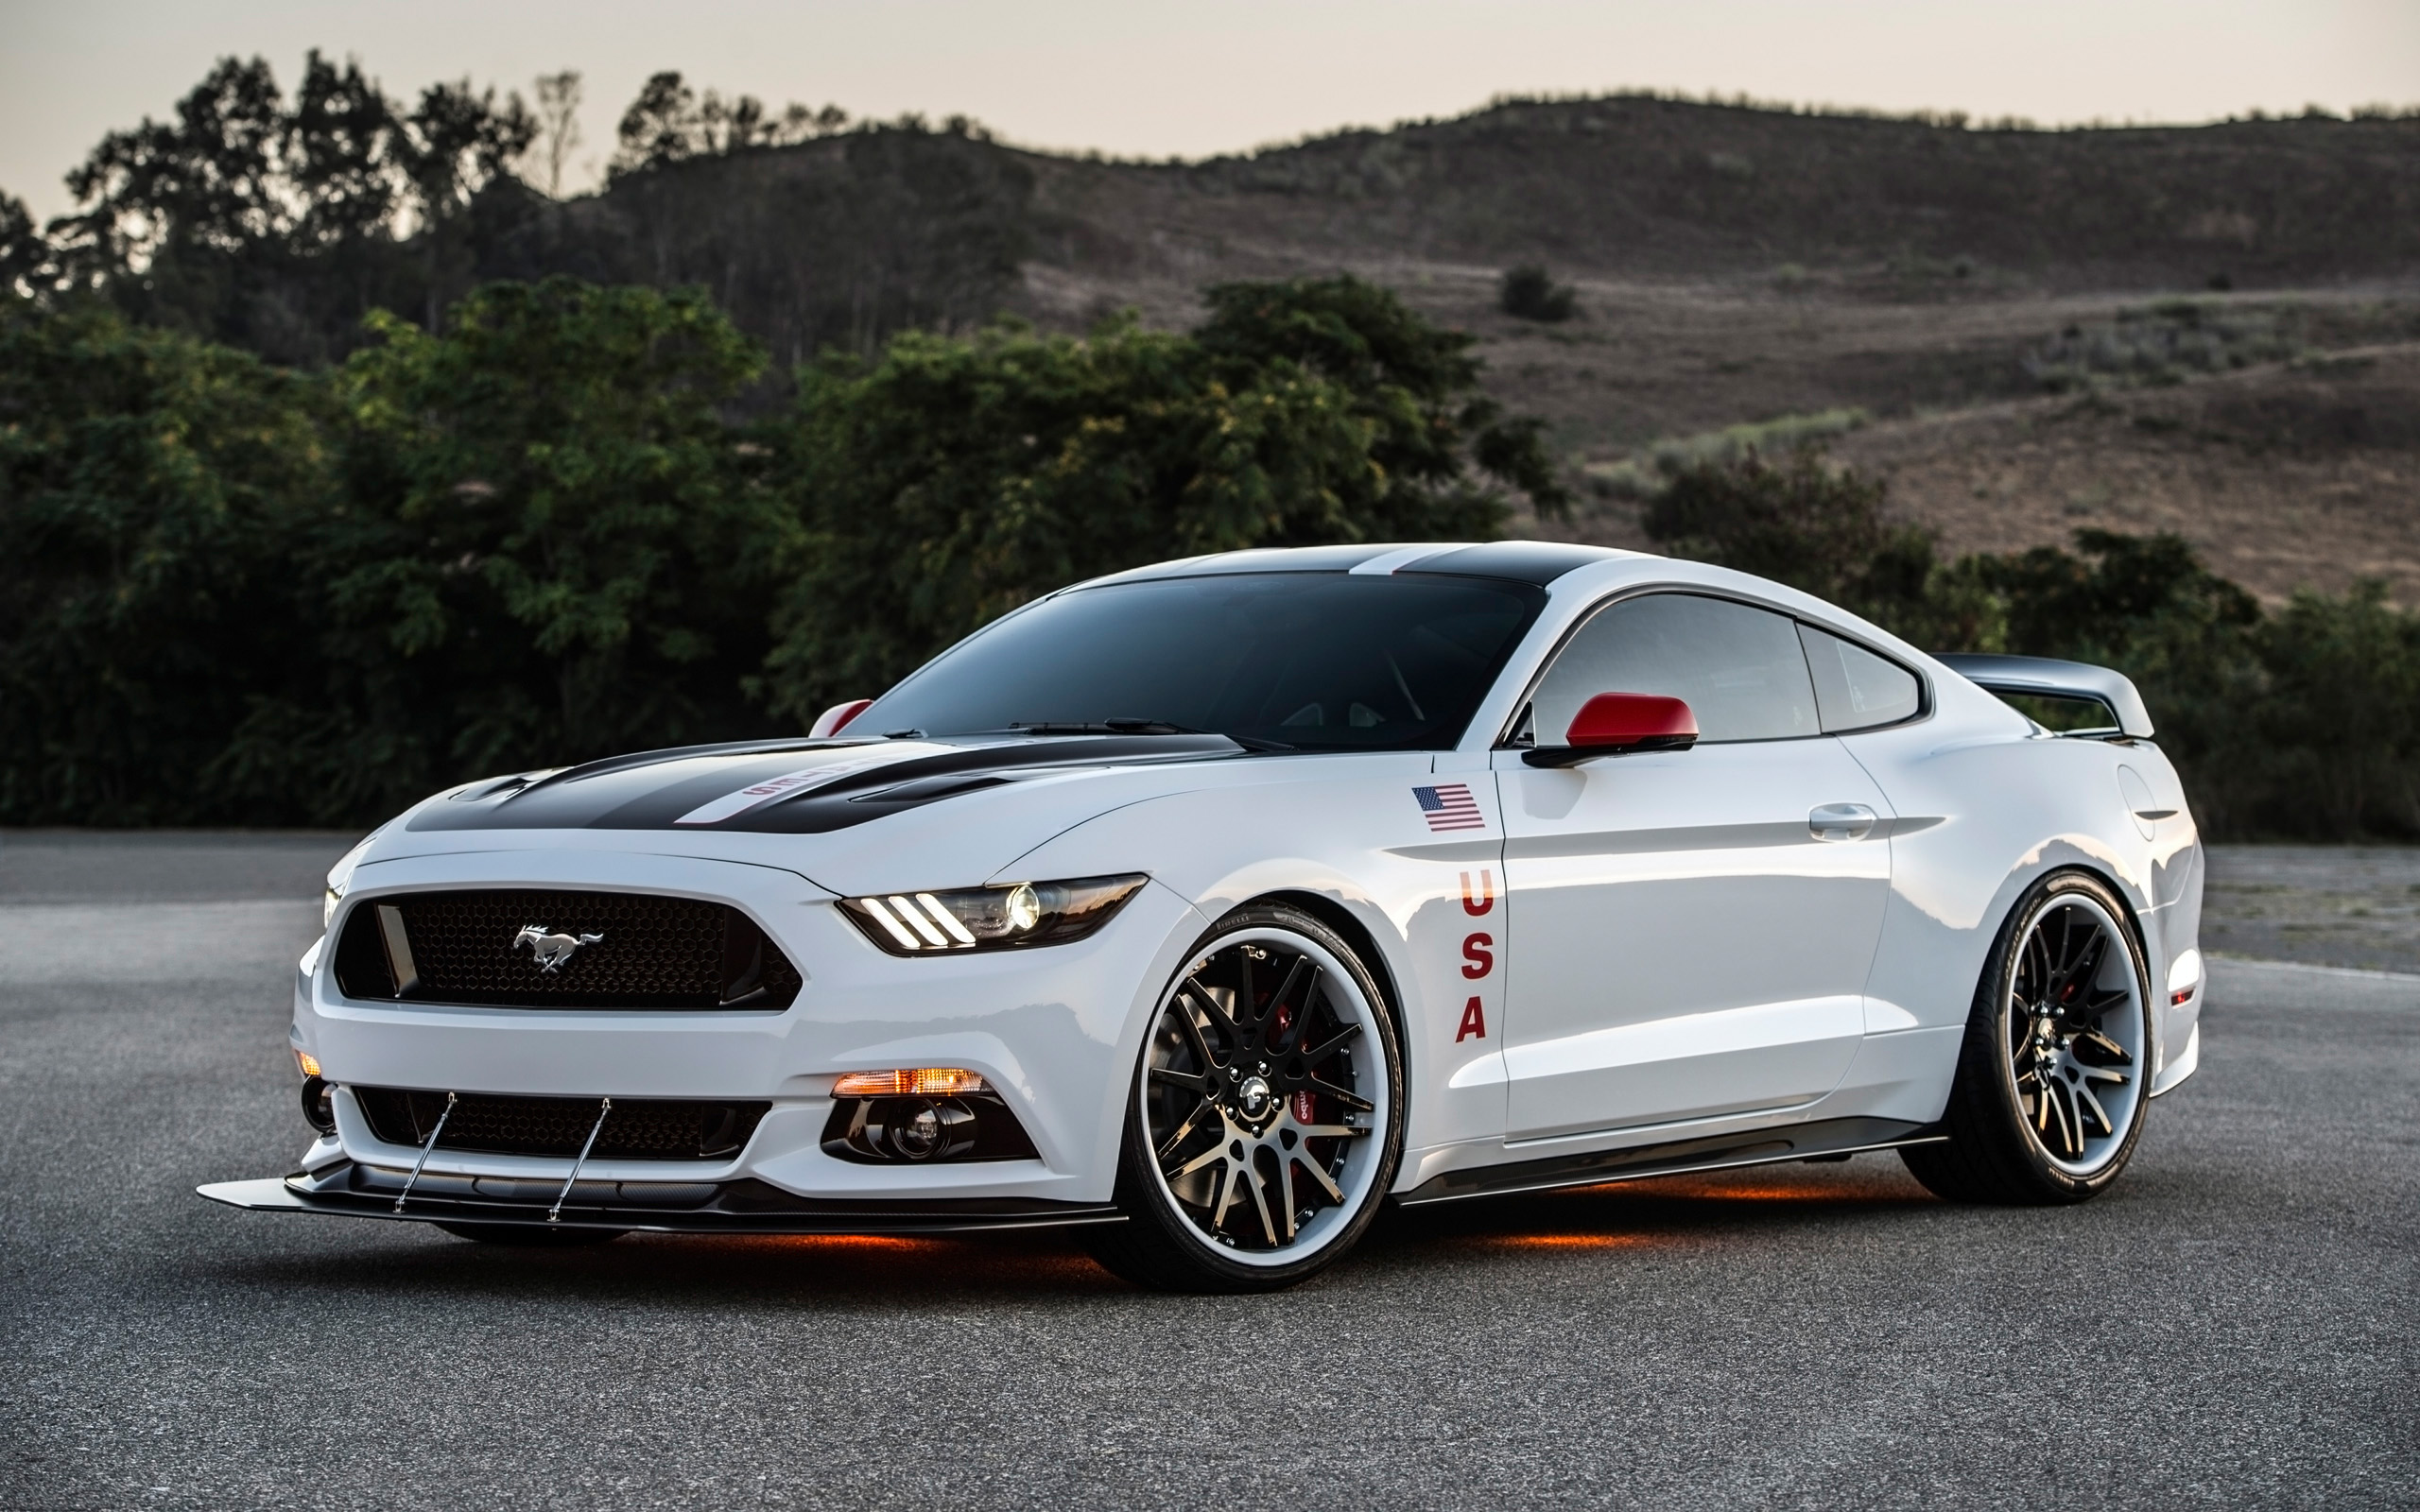 2015 Ford Mustang Gt Apollo Edition Wallpaper Hd Car Wallpapers Id 5459